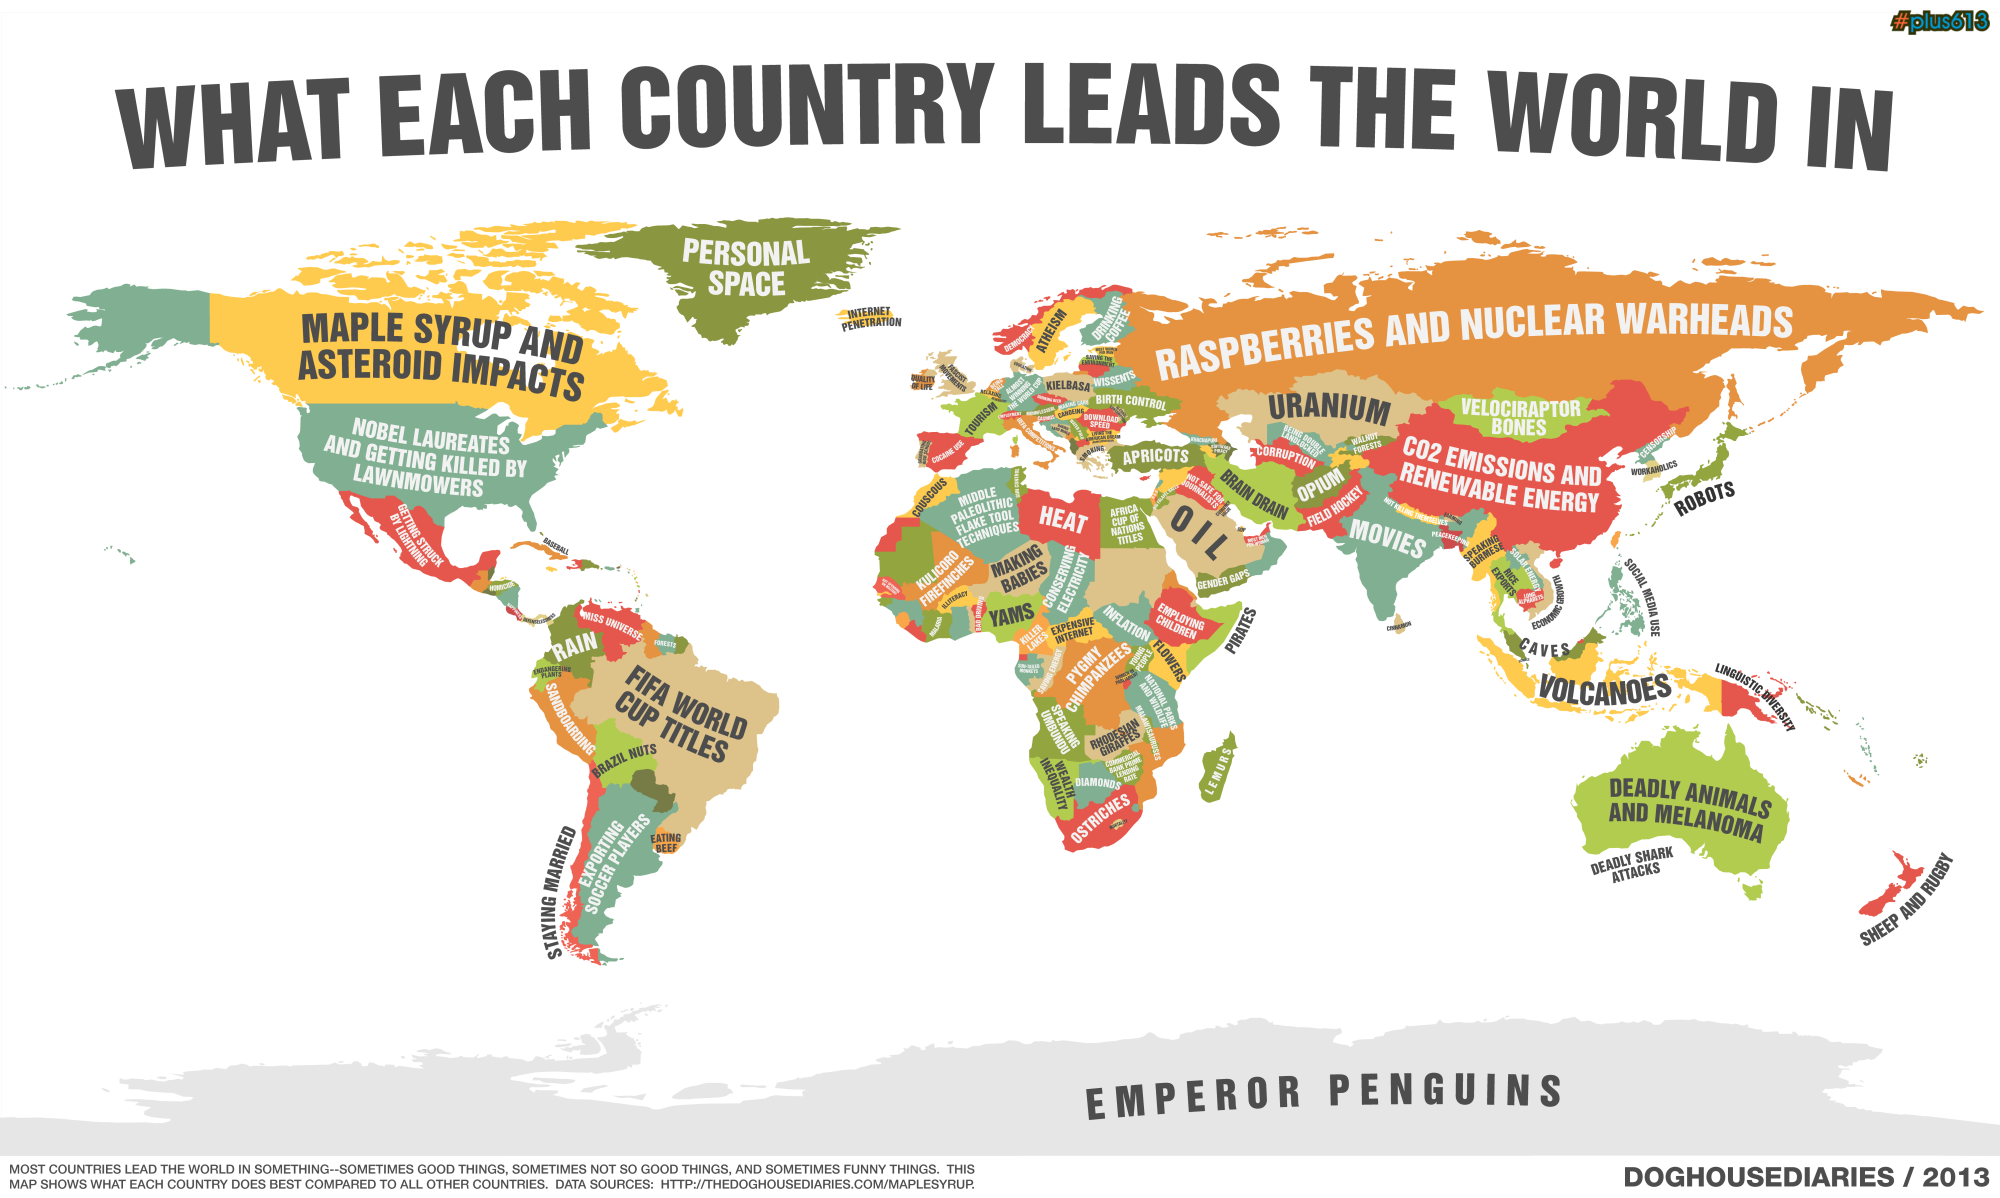 What each country leads the world in